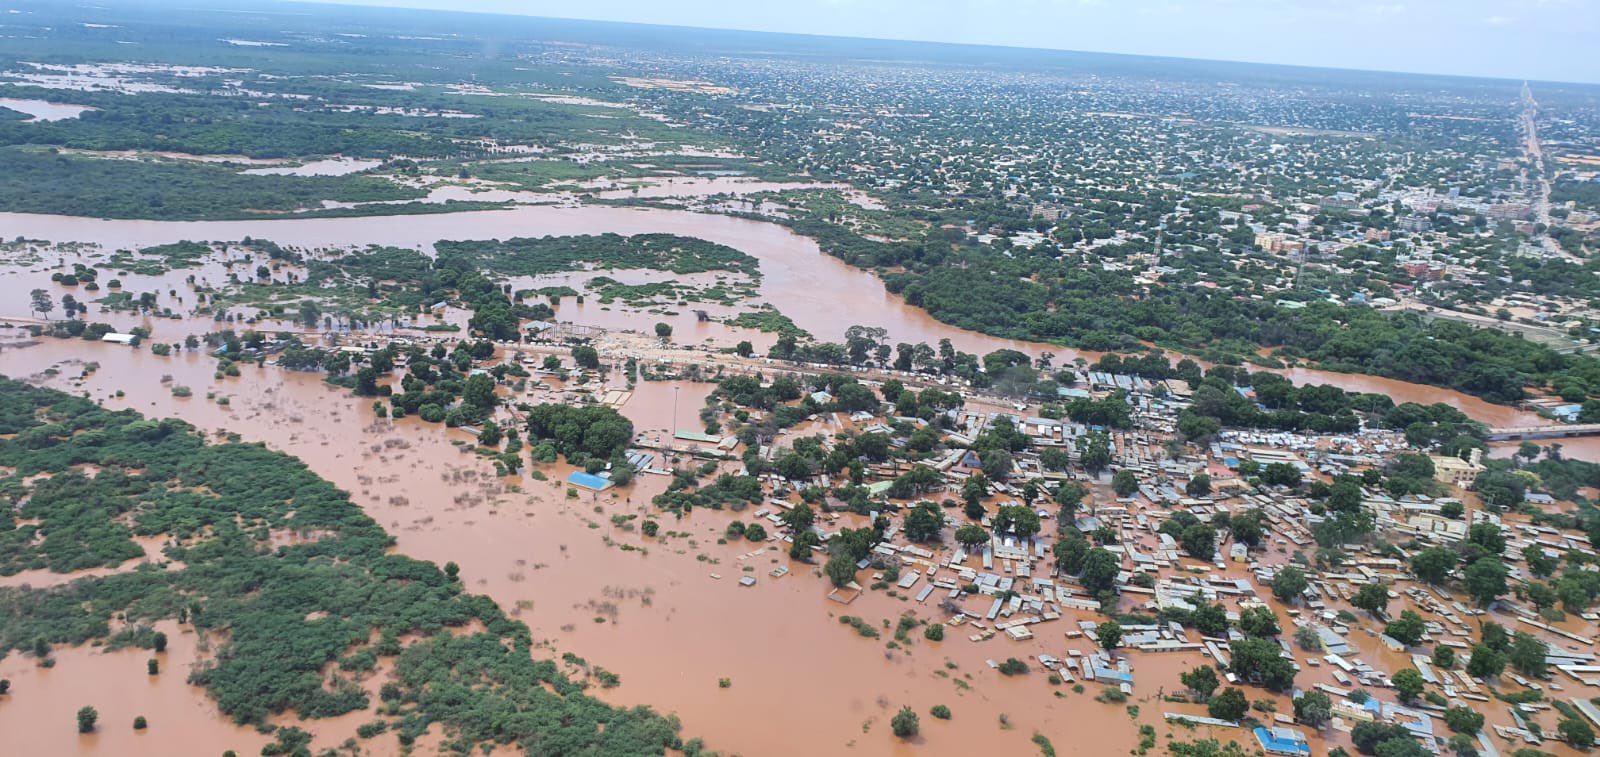 Tana River, Isiolo leaders urge immediate action over flood crisis